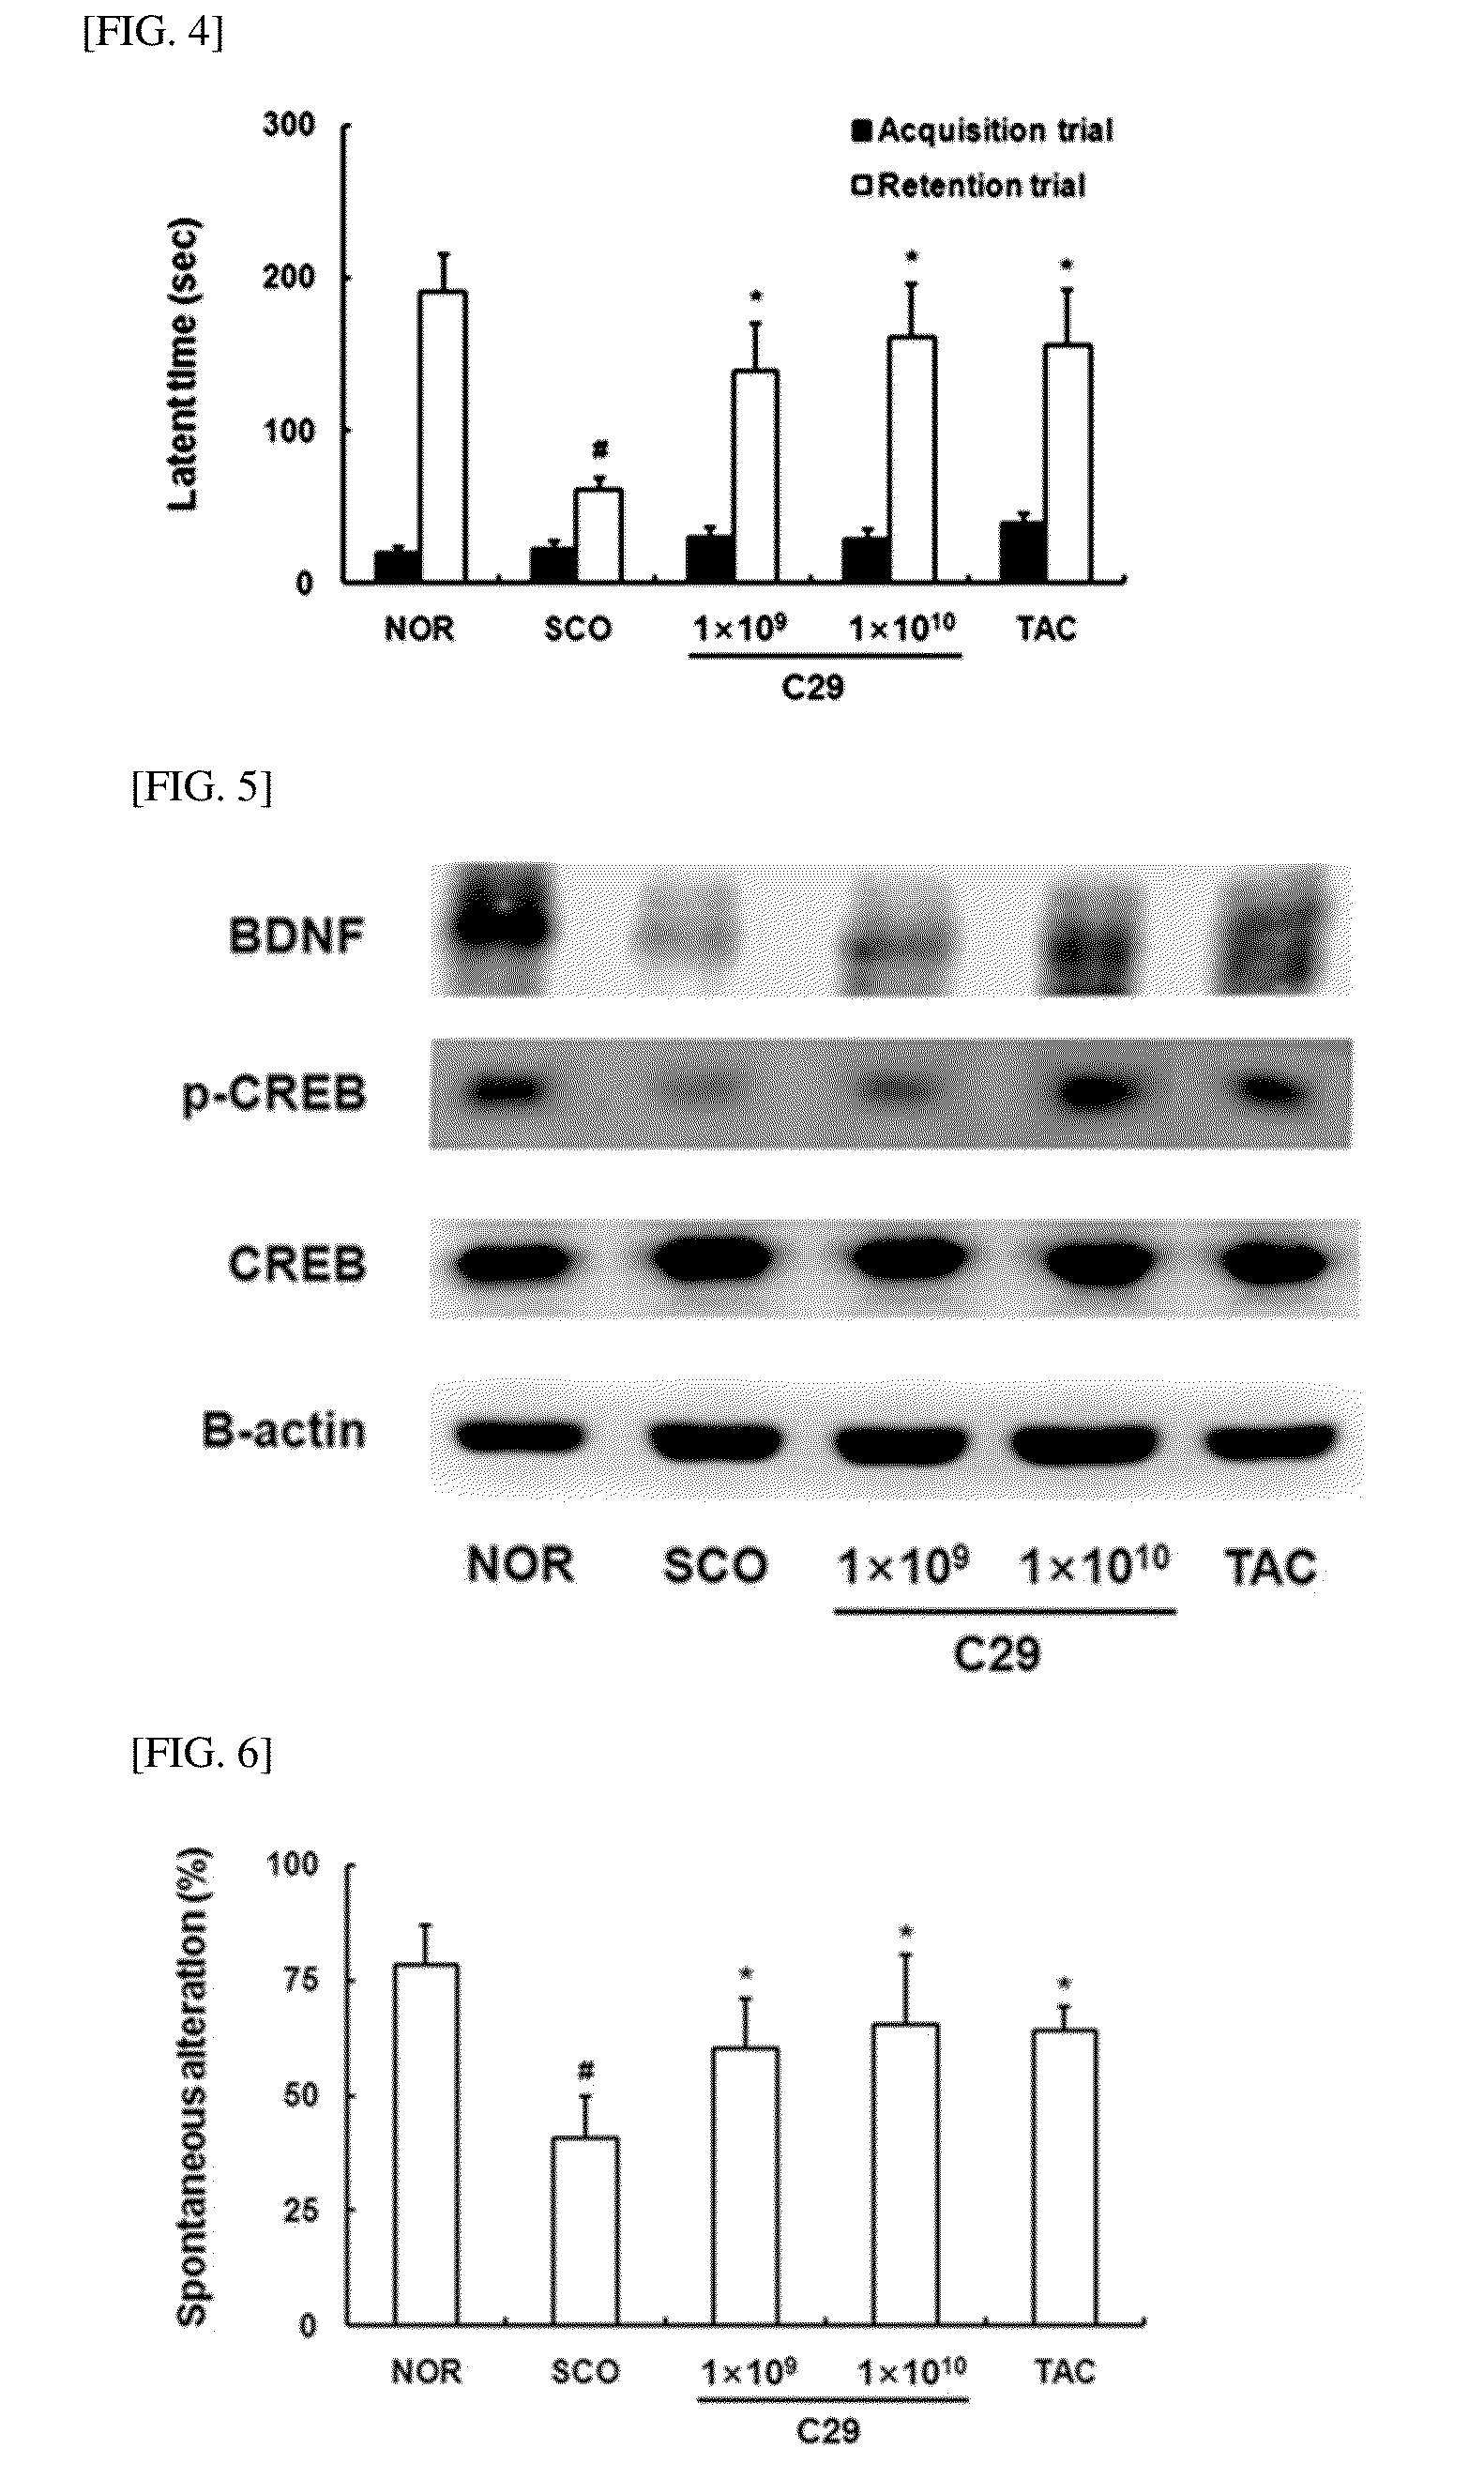 Lactic acid bacteria capable of preventing and/or treating senescence and dementia